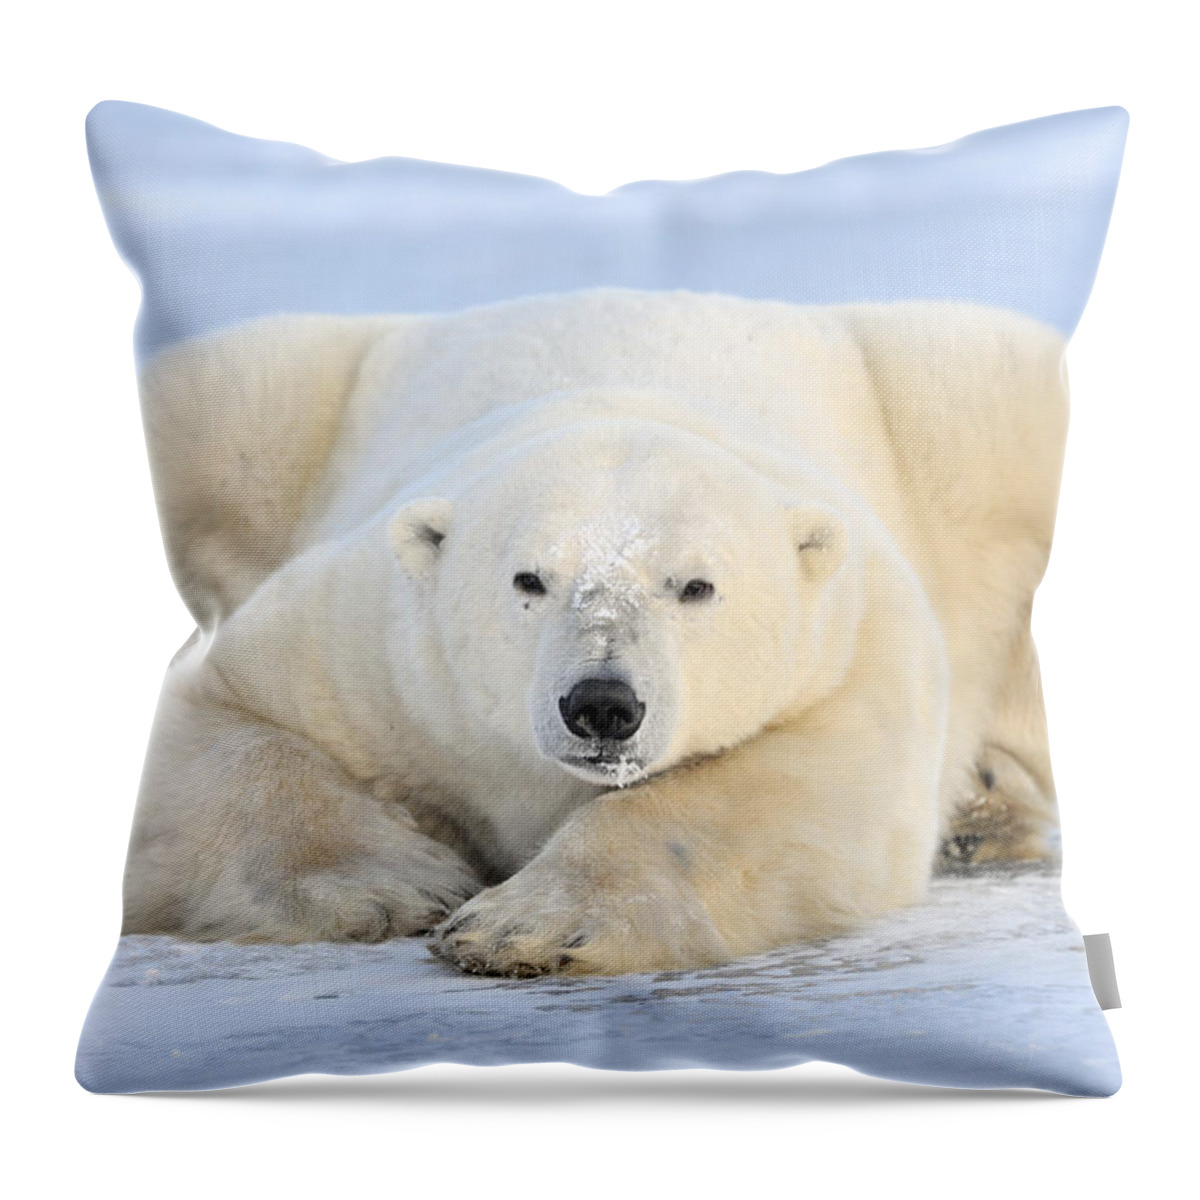 Nis Throw Pillow featuring the photograph Polar Bear On Pack Ice Churchill by Andre Gilden